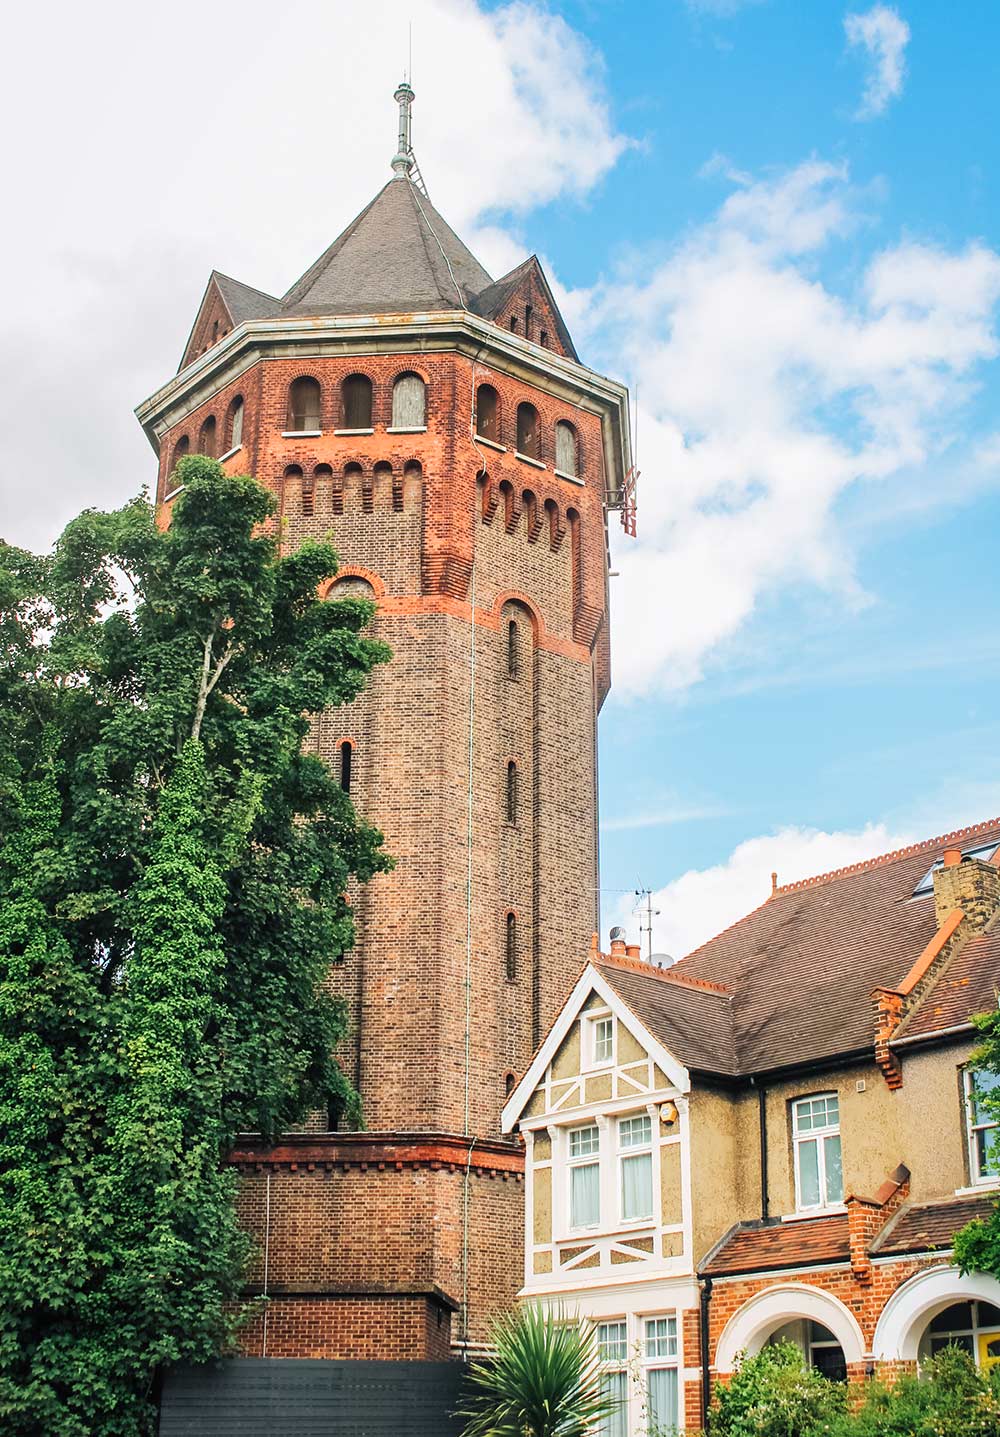 Shooters Hill London - local area guide